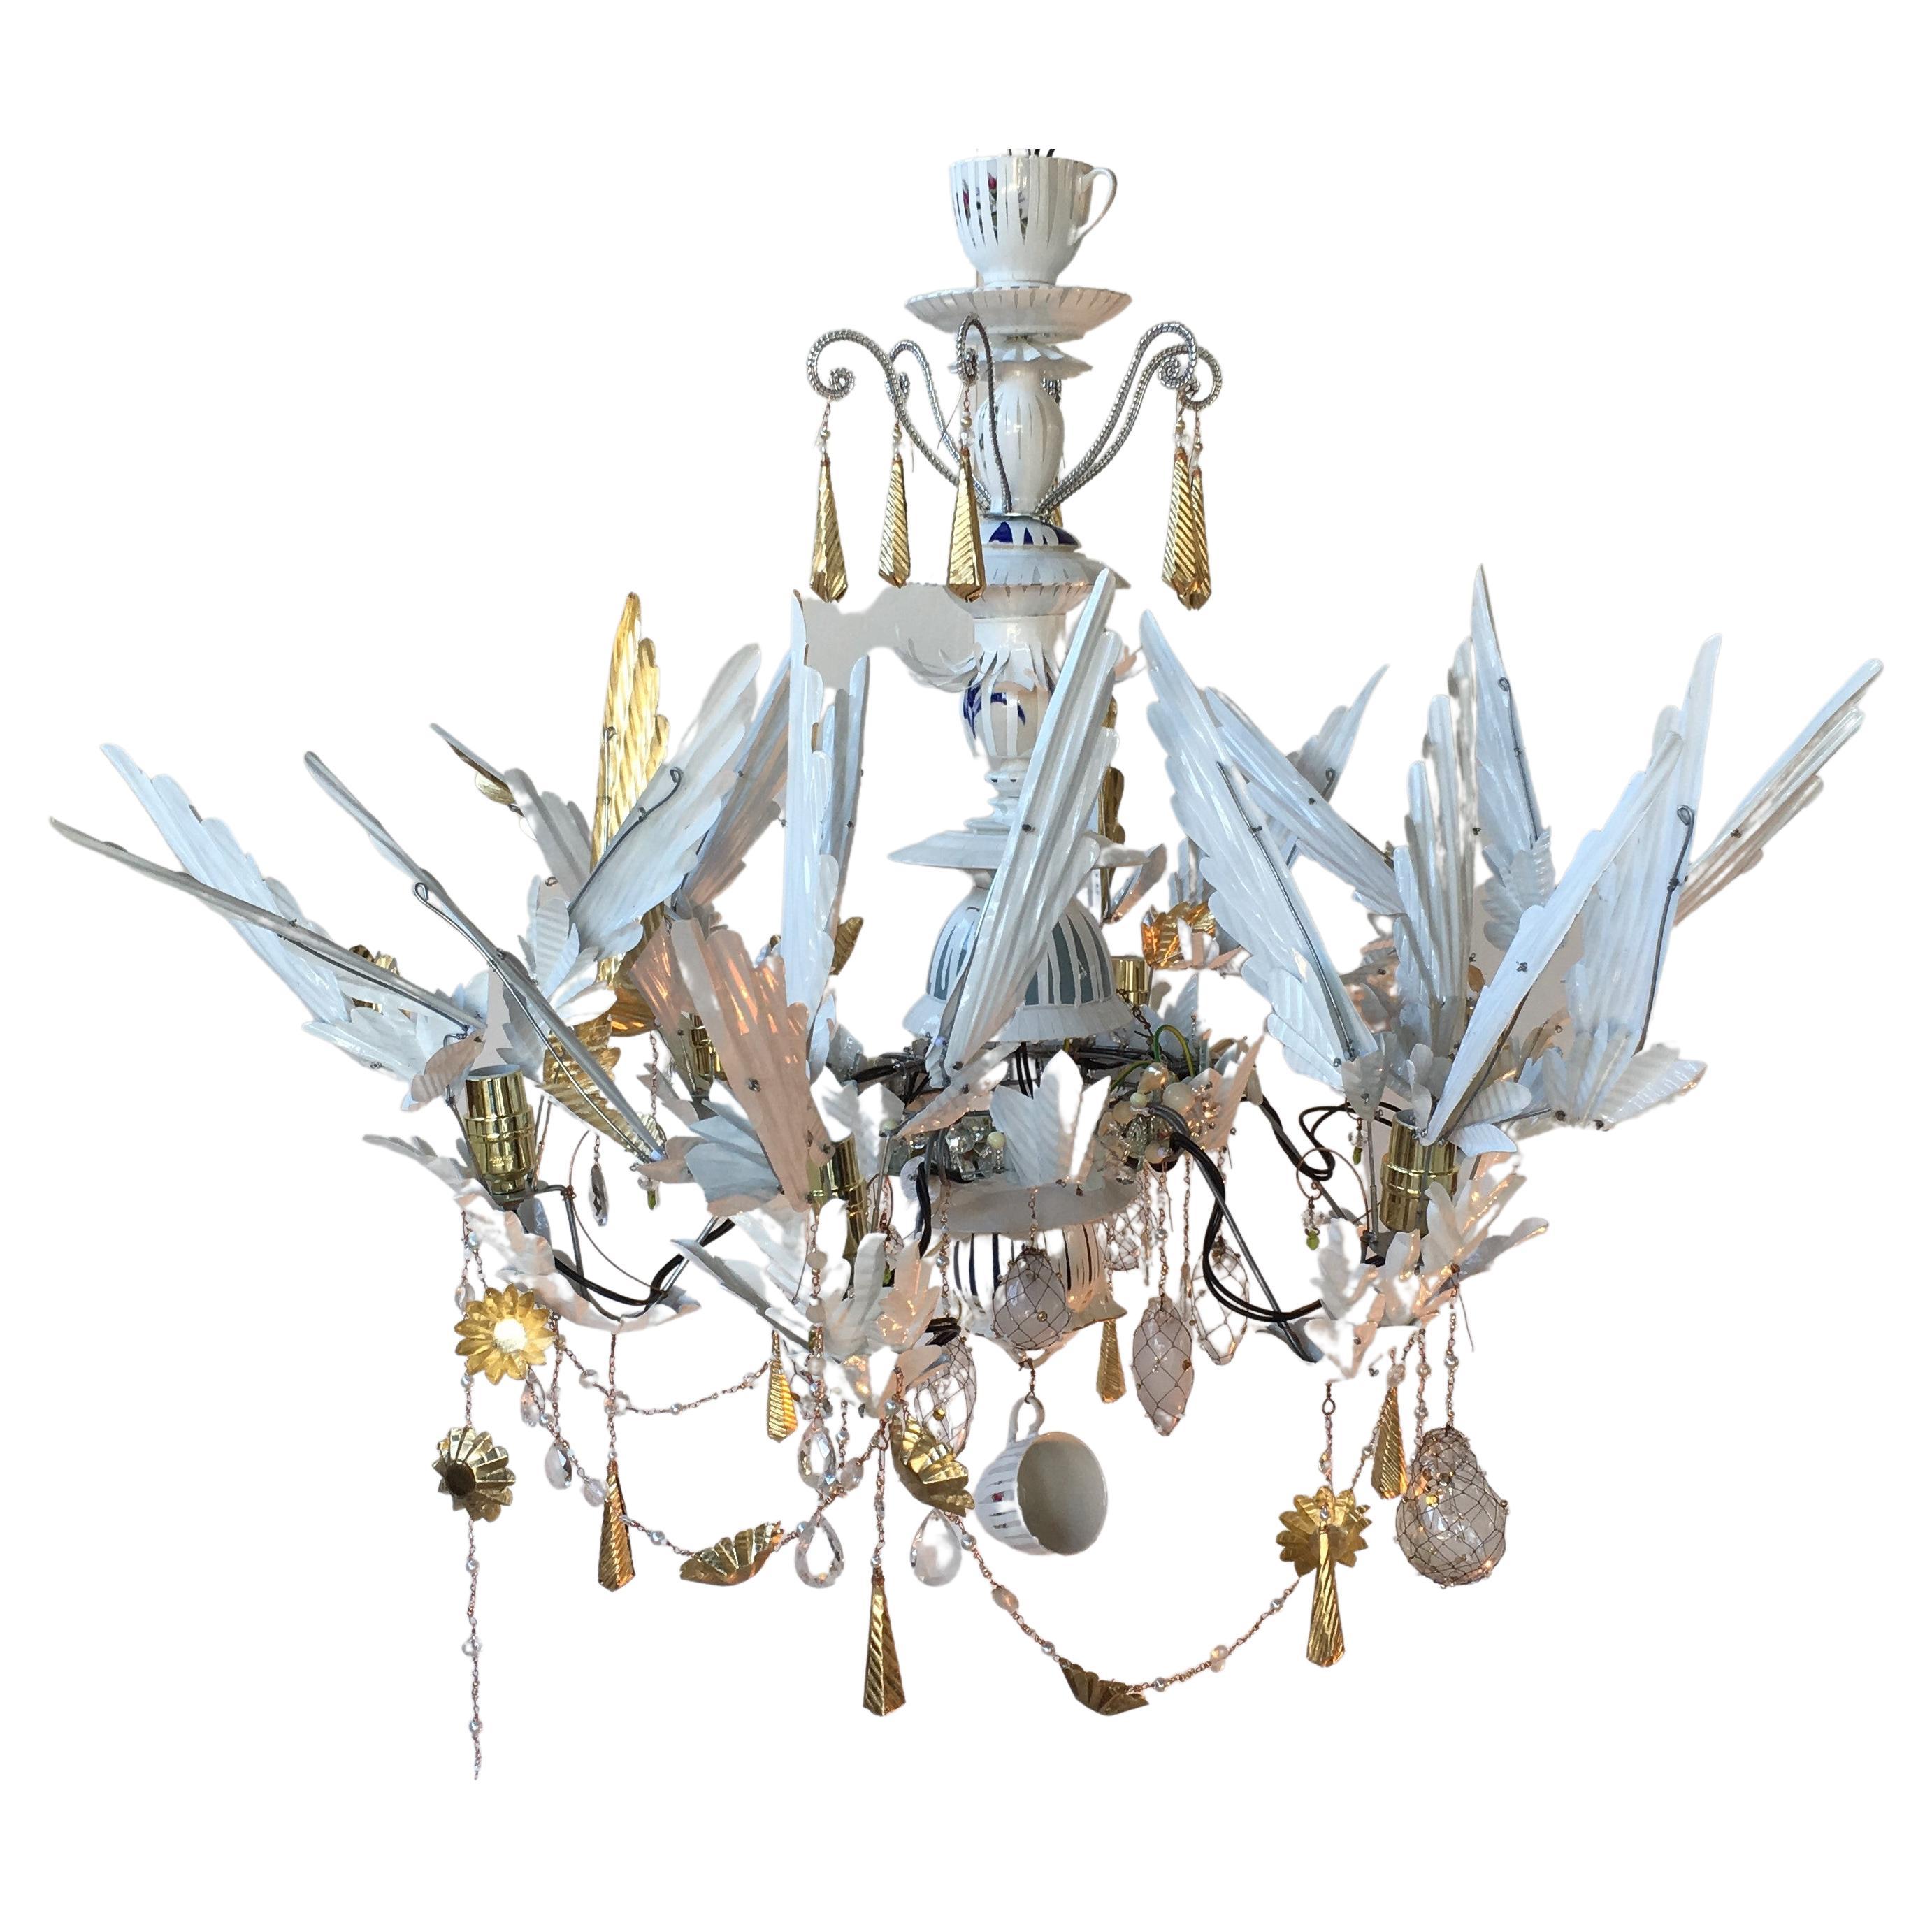 Magpie Teacup Frenzy Chandelier For Sale